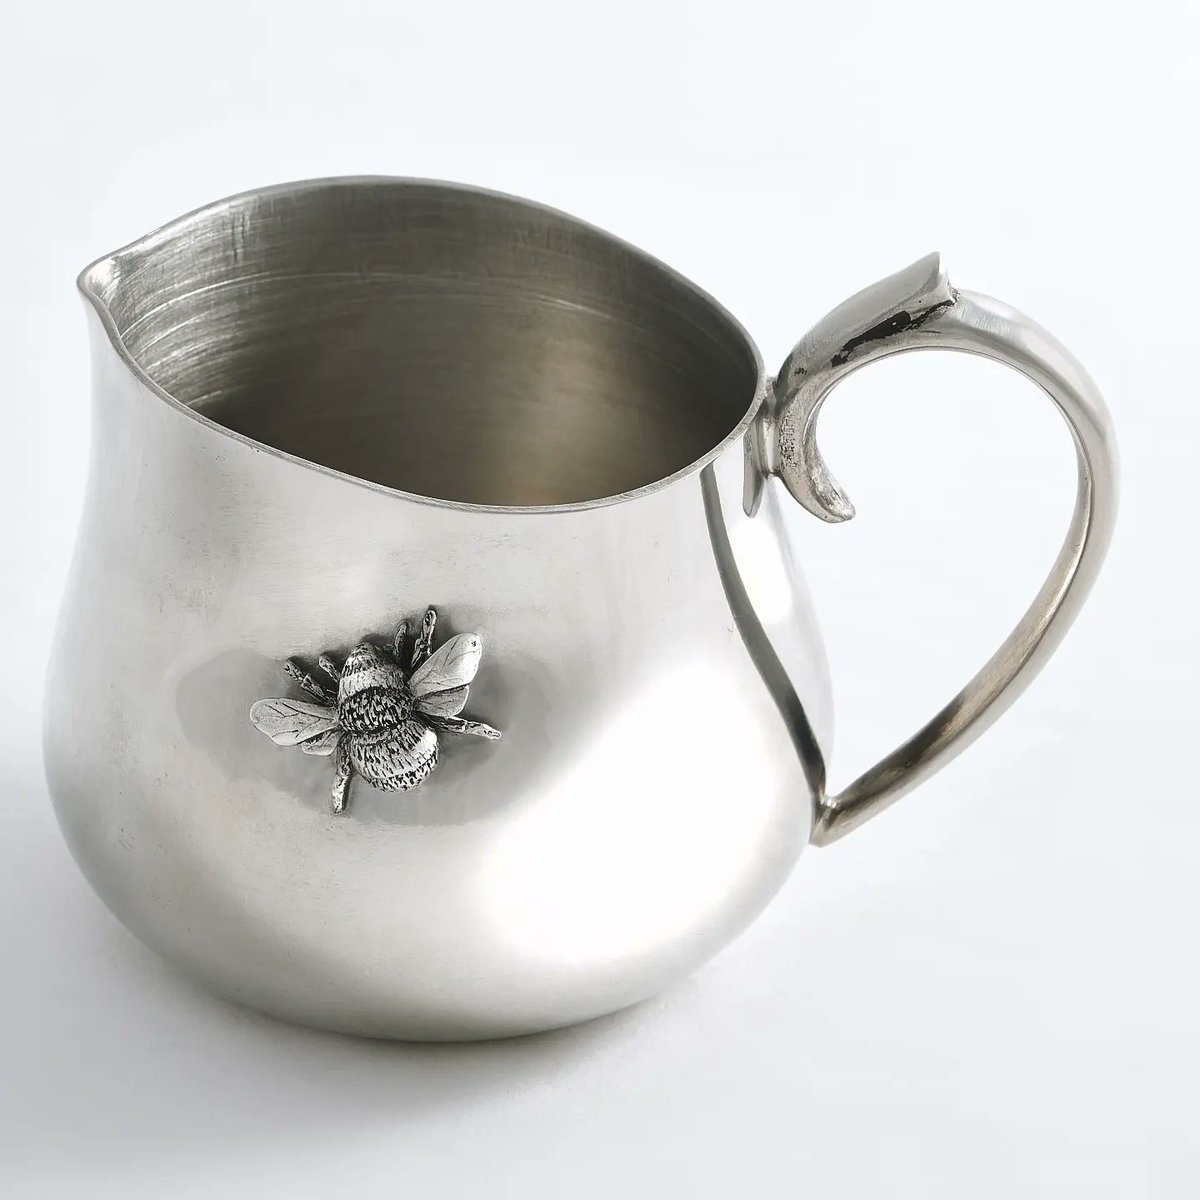 This is our polished pewter jug featuring very cute wild life images in a series of designs. Handmade in our workshop in Sheffield.
#bctf #bctf_harrogate #britishmade #britishcraft #sheffieldmade #sheffieldgifts